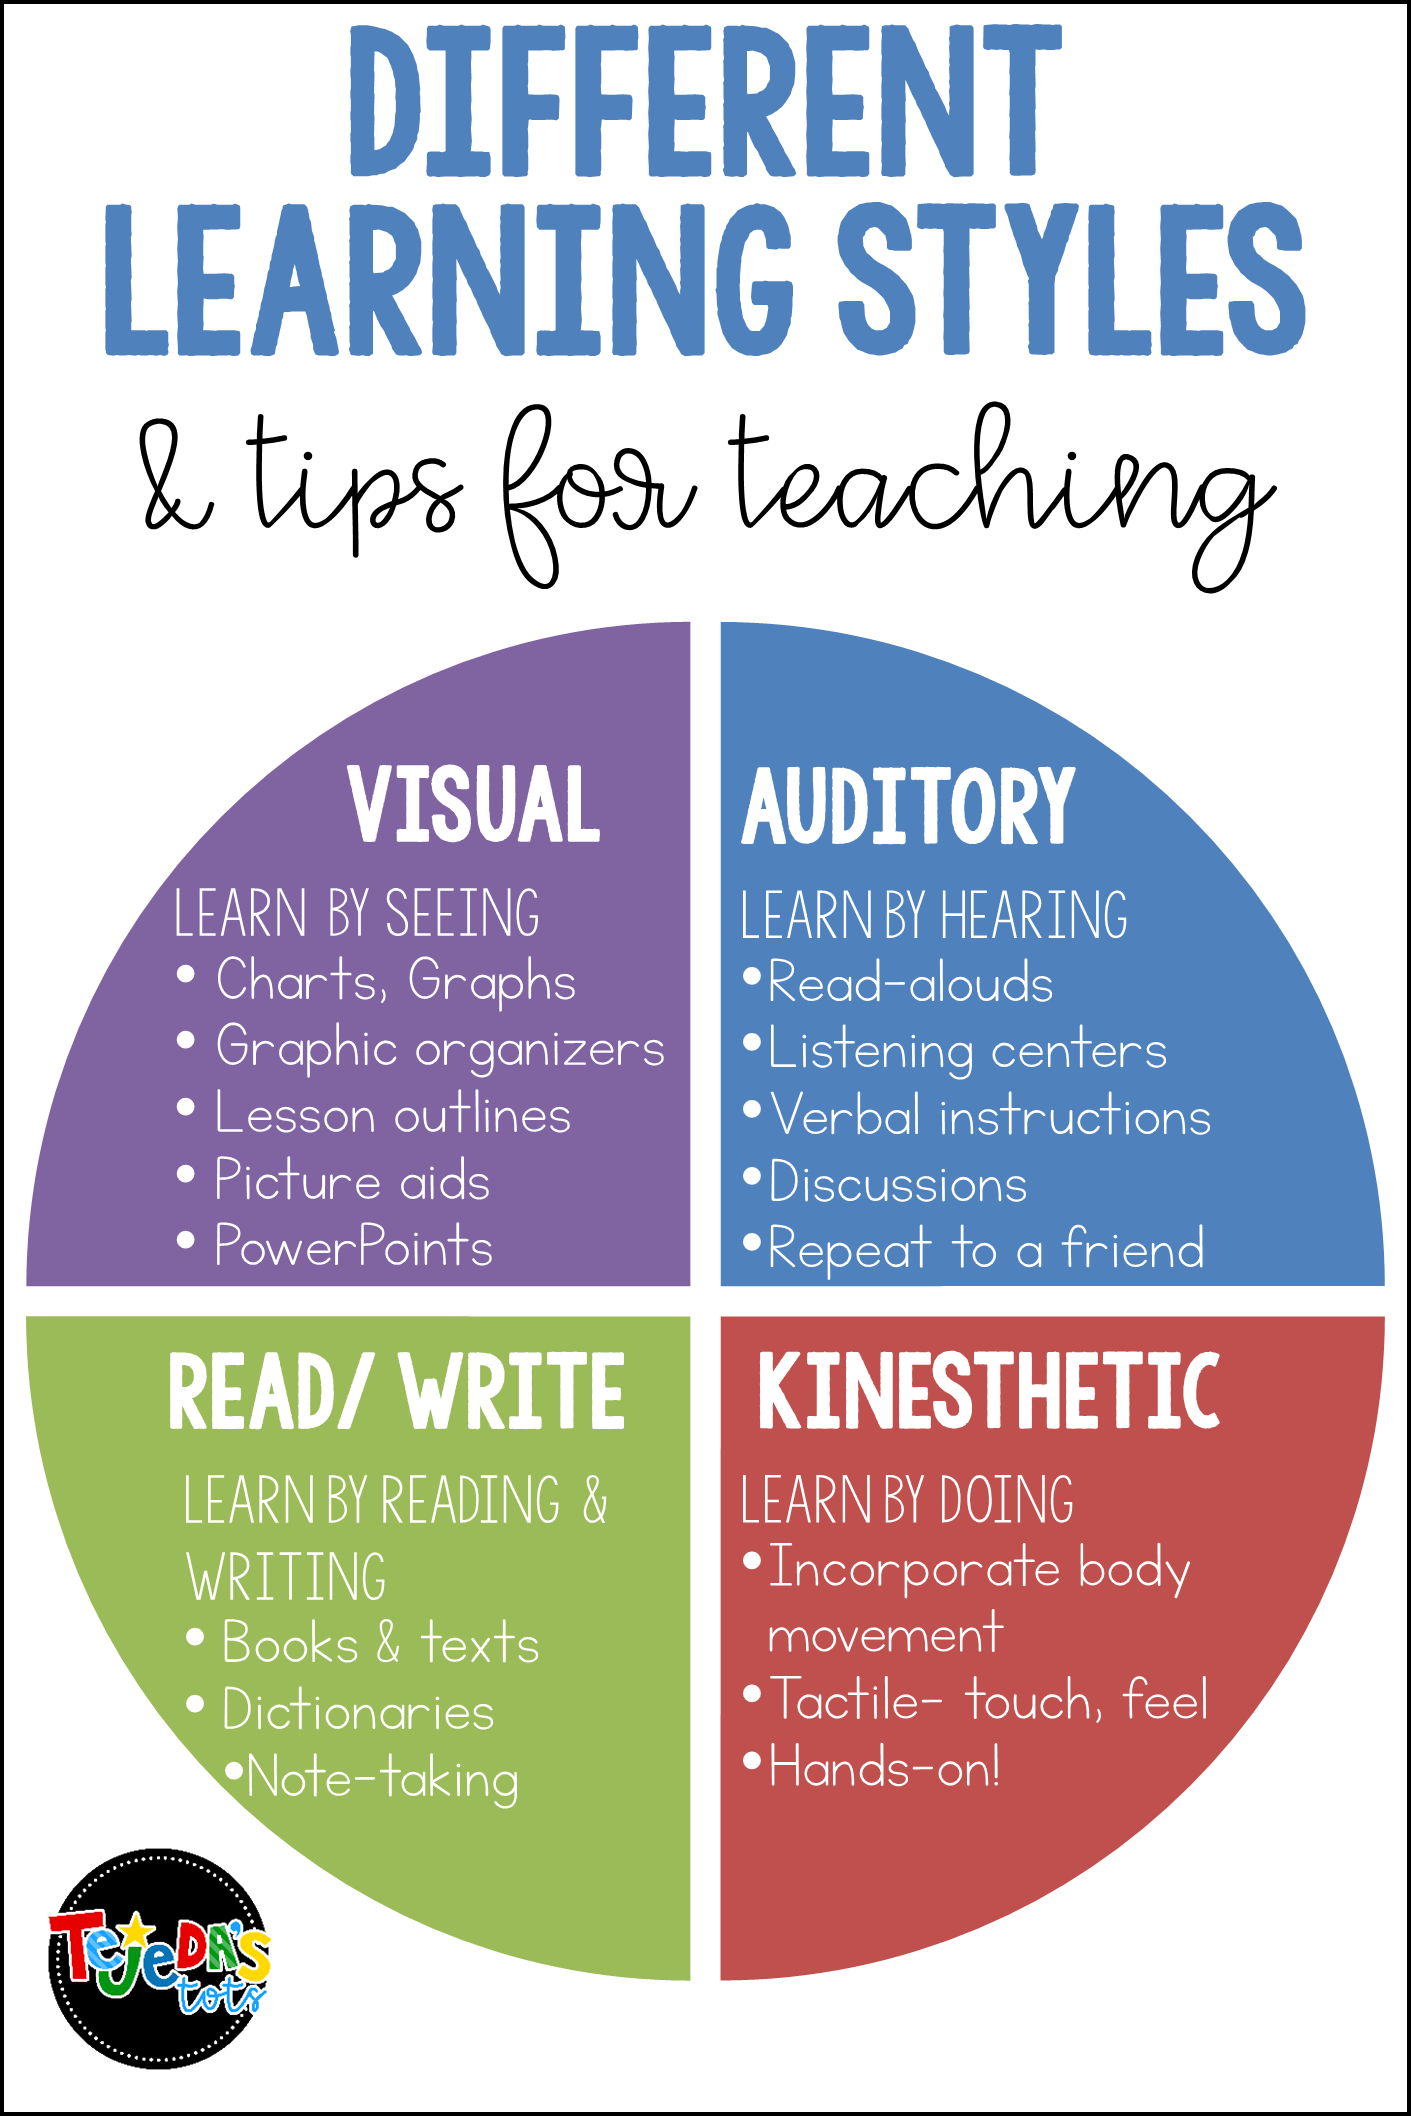 Didactic techniques used in the Post-reading stage, tasks and solutions